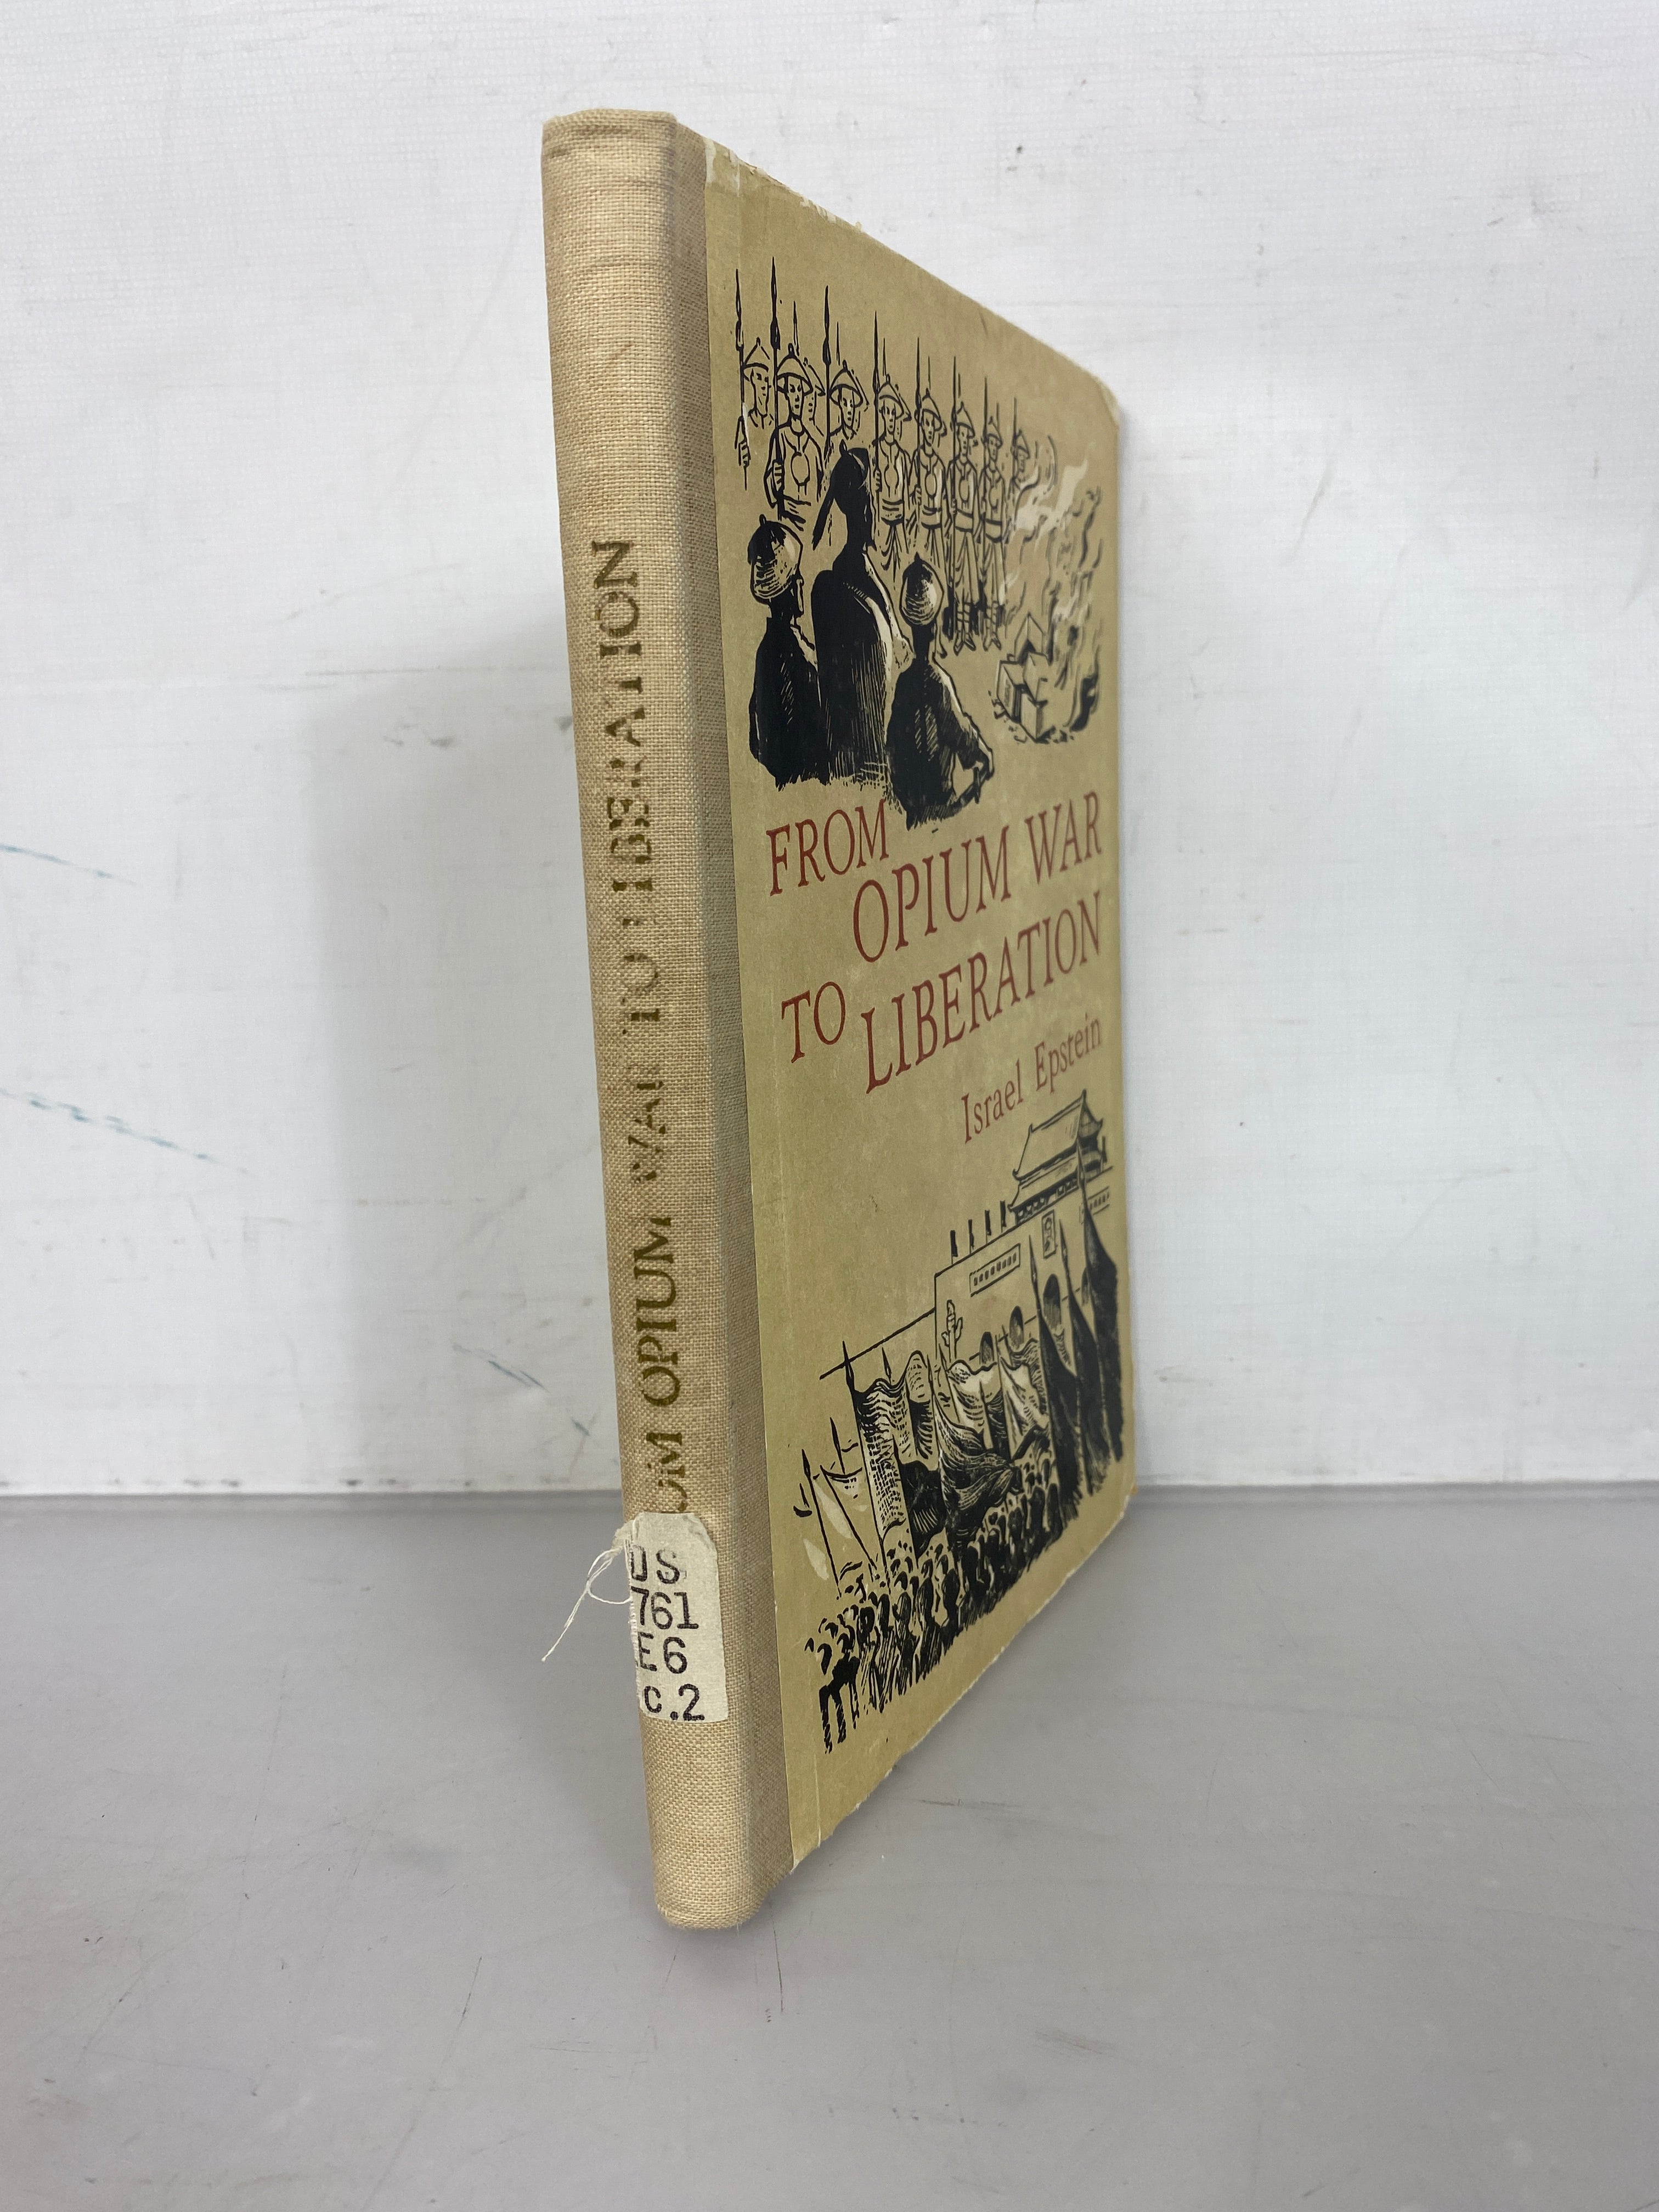 From Opium War to Liberation by Epstein (1956) Vintage First Edition HC